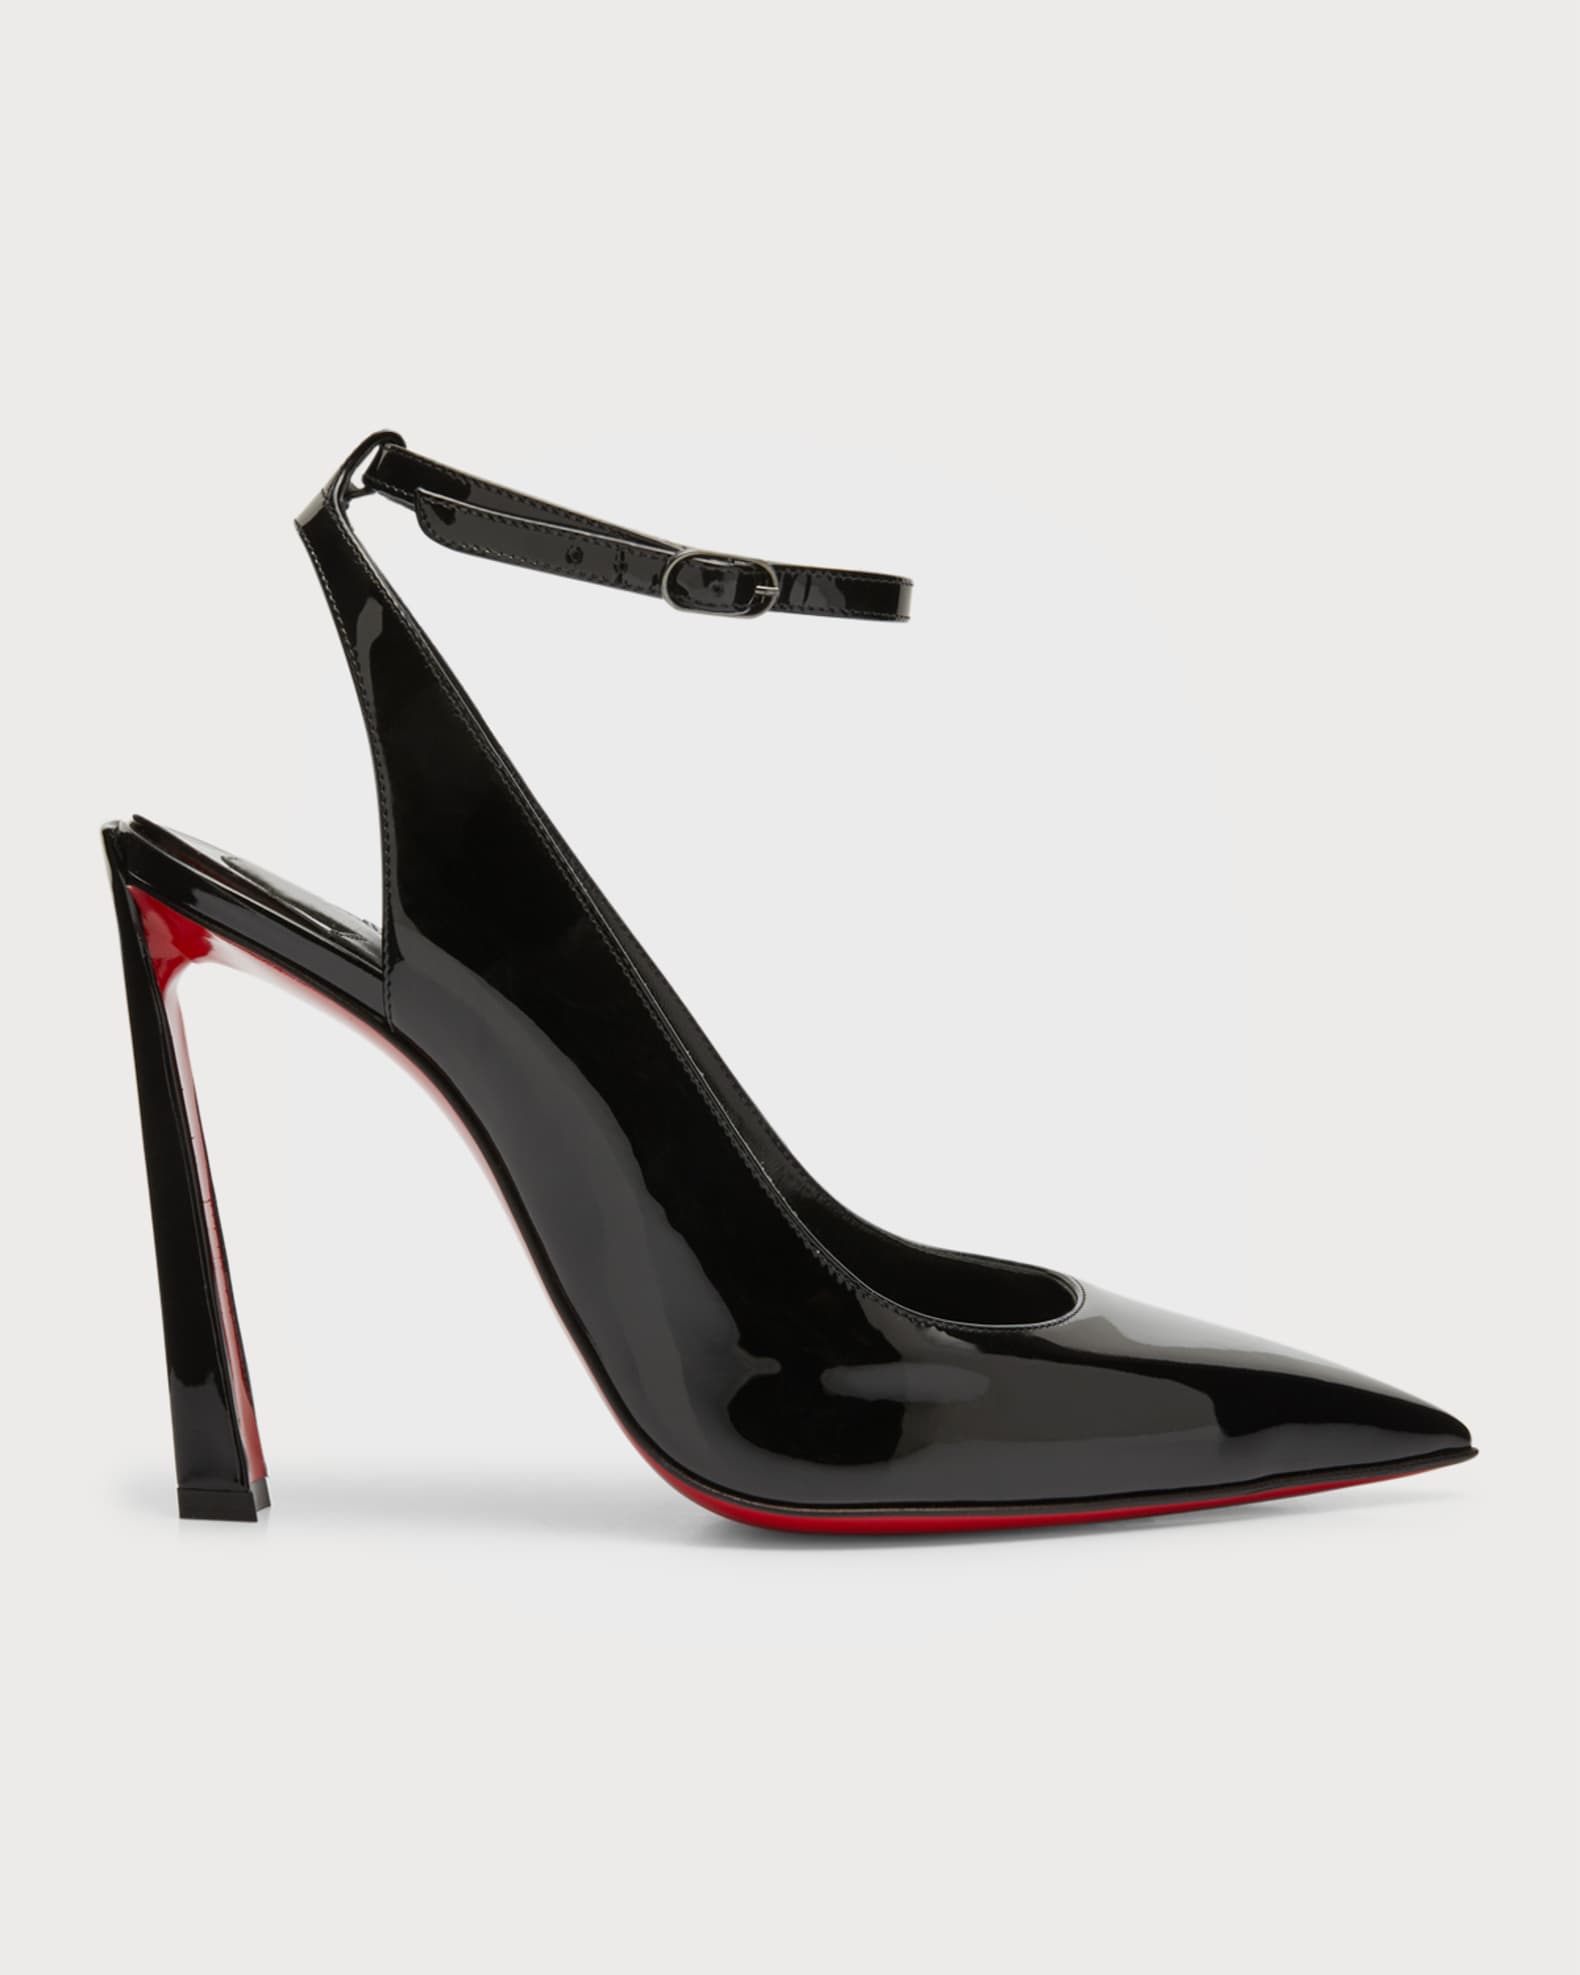 My First Pair of Christian Louboutin Heels - Cashmere & Jeans